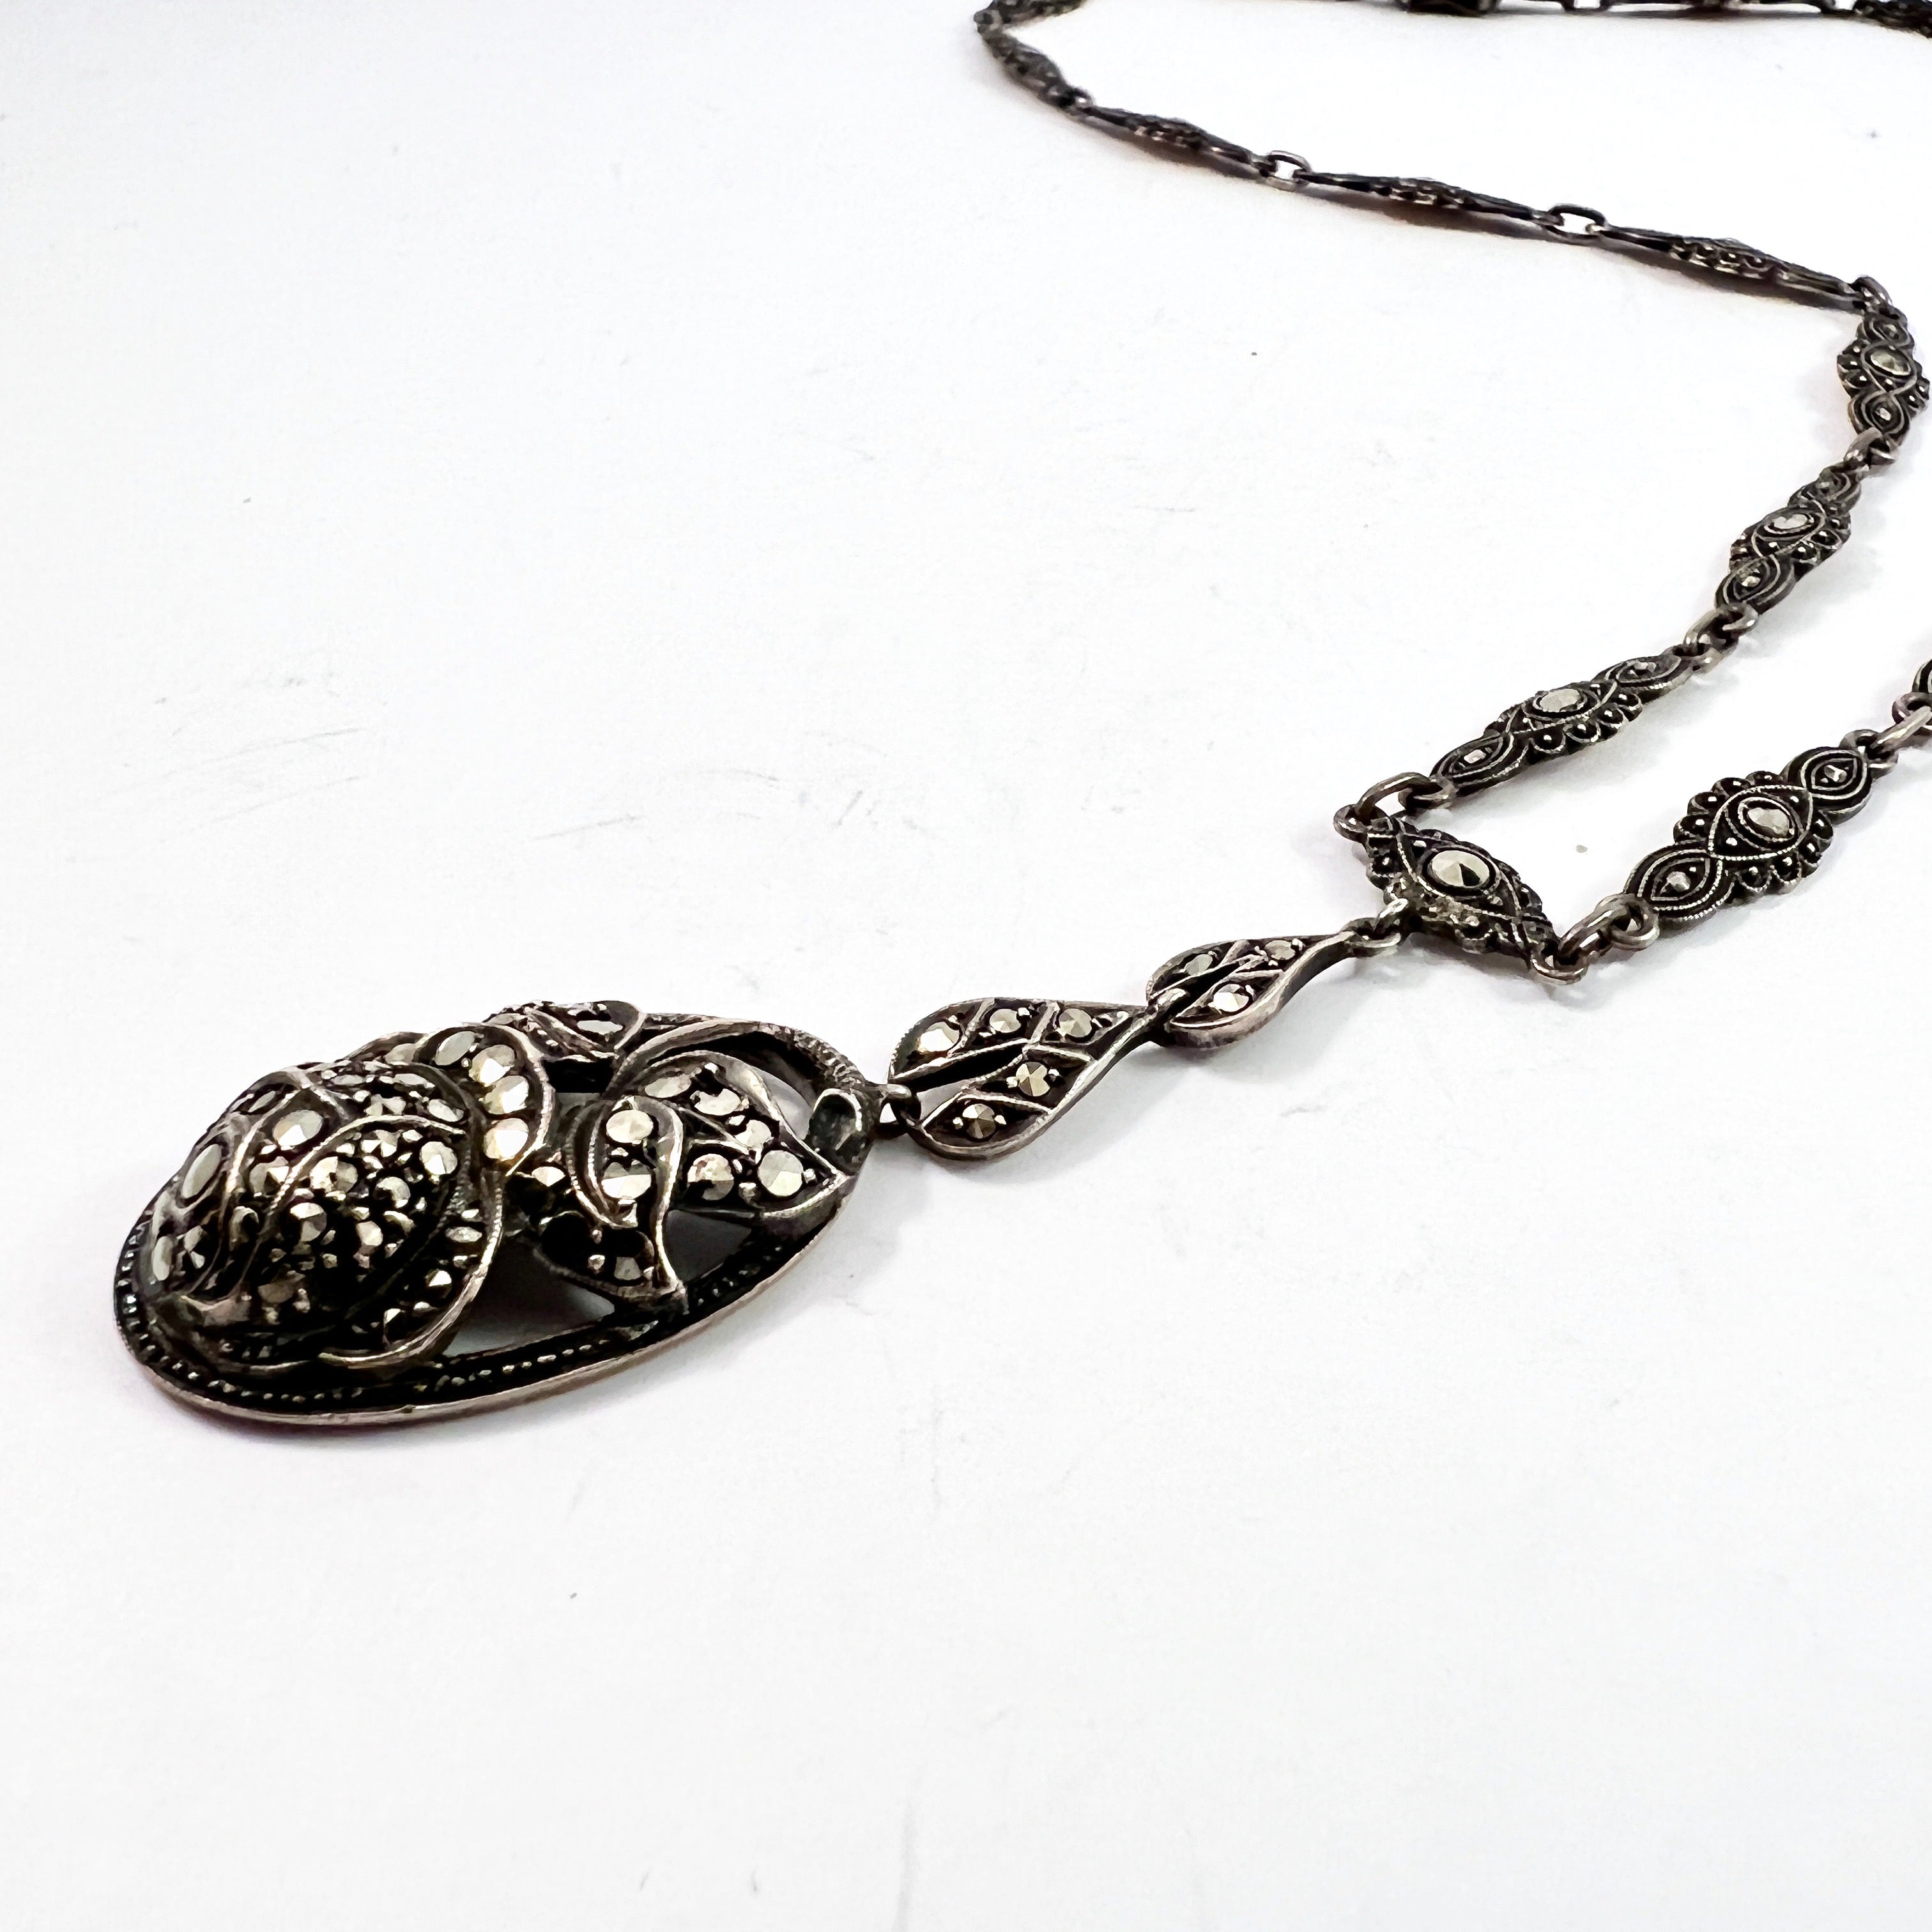 Germany/Austria 1920-30s Sterling 935 Silver Marcasite Pendant Necklace